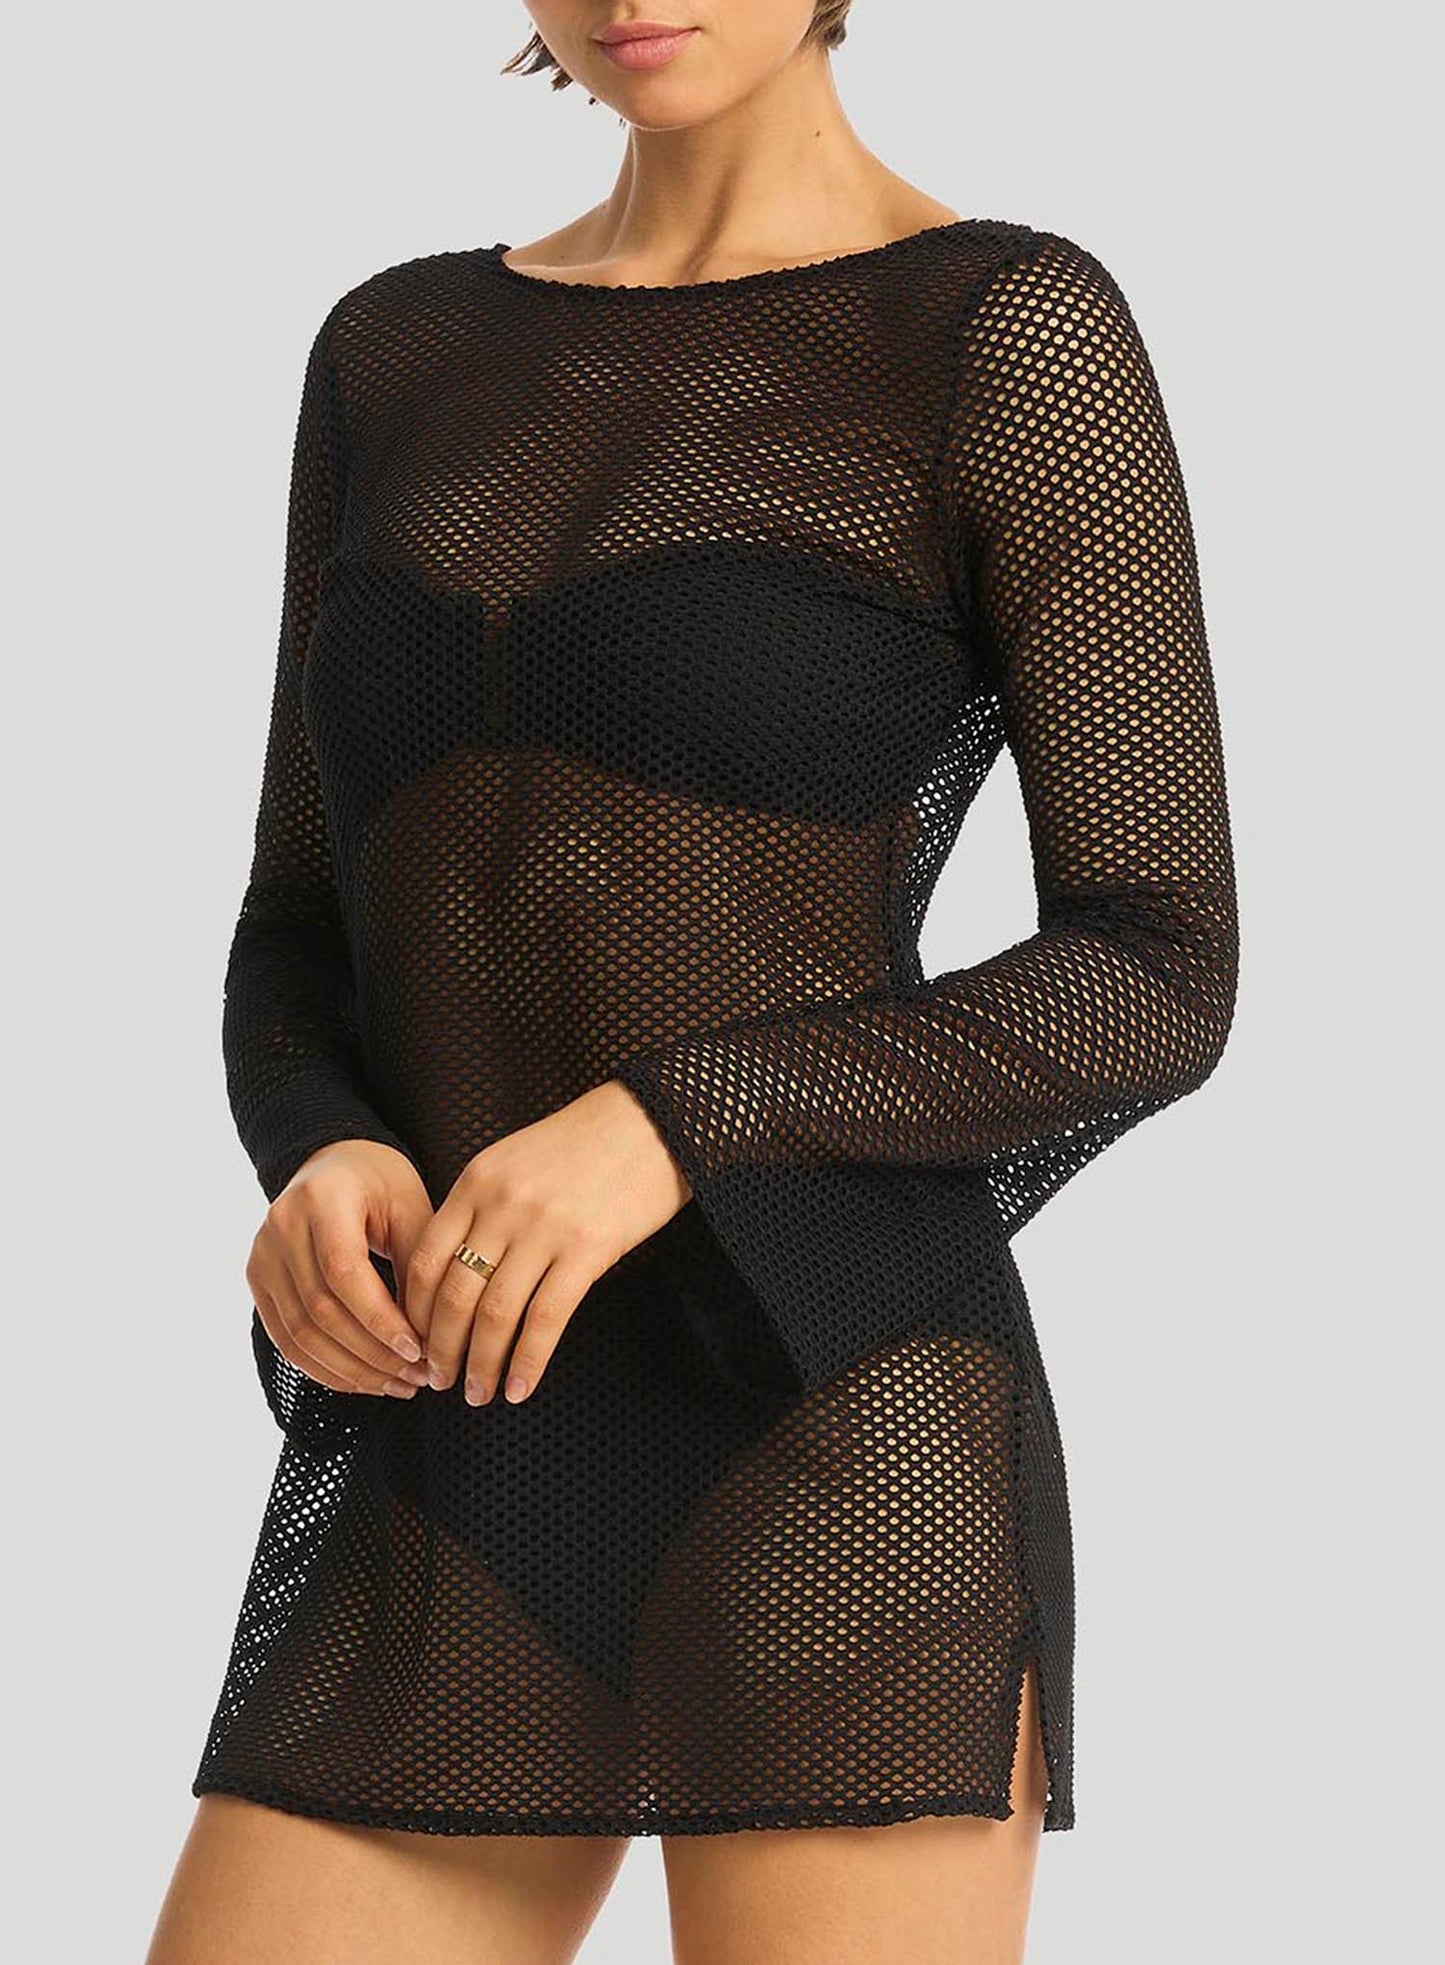 Sea Level: Surf Mesh Cover Up Black